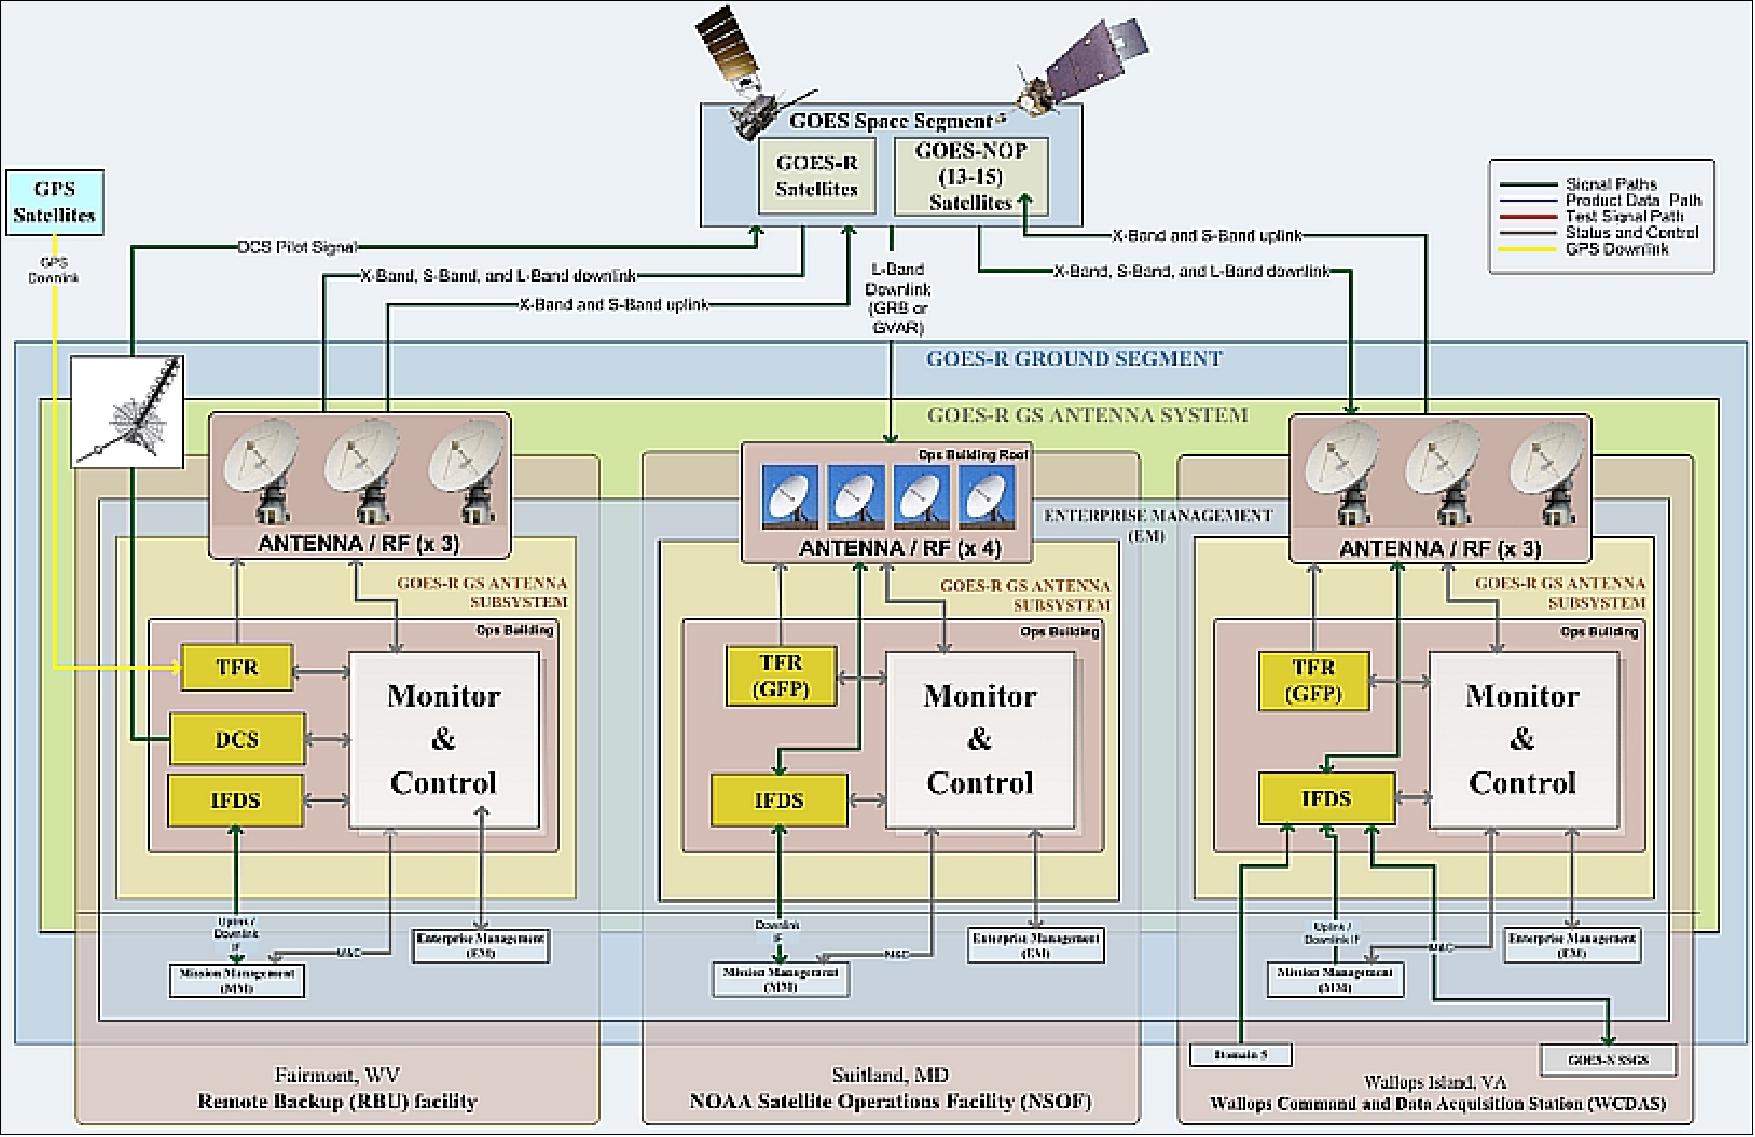 Figure 74: Antenna system architecture components at each facility (image credit: NOAA, Harris)